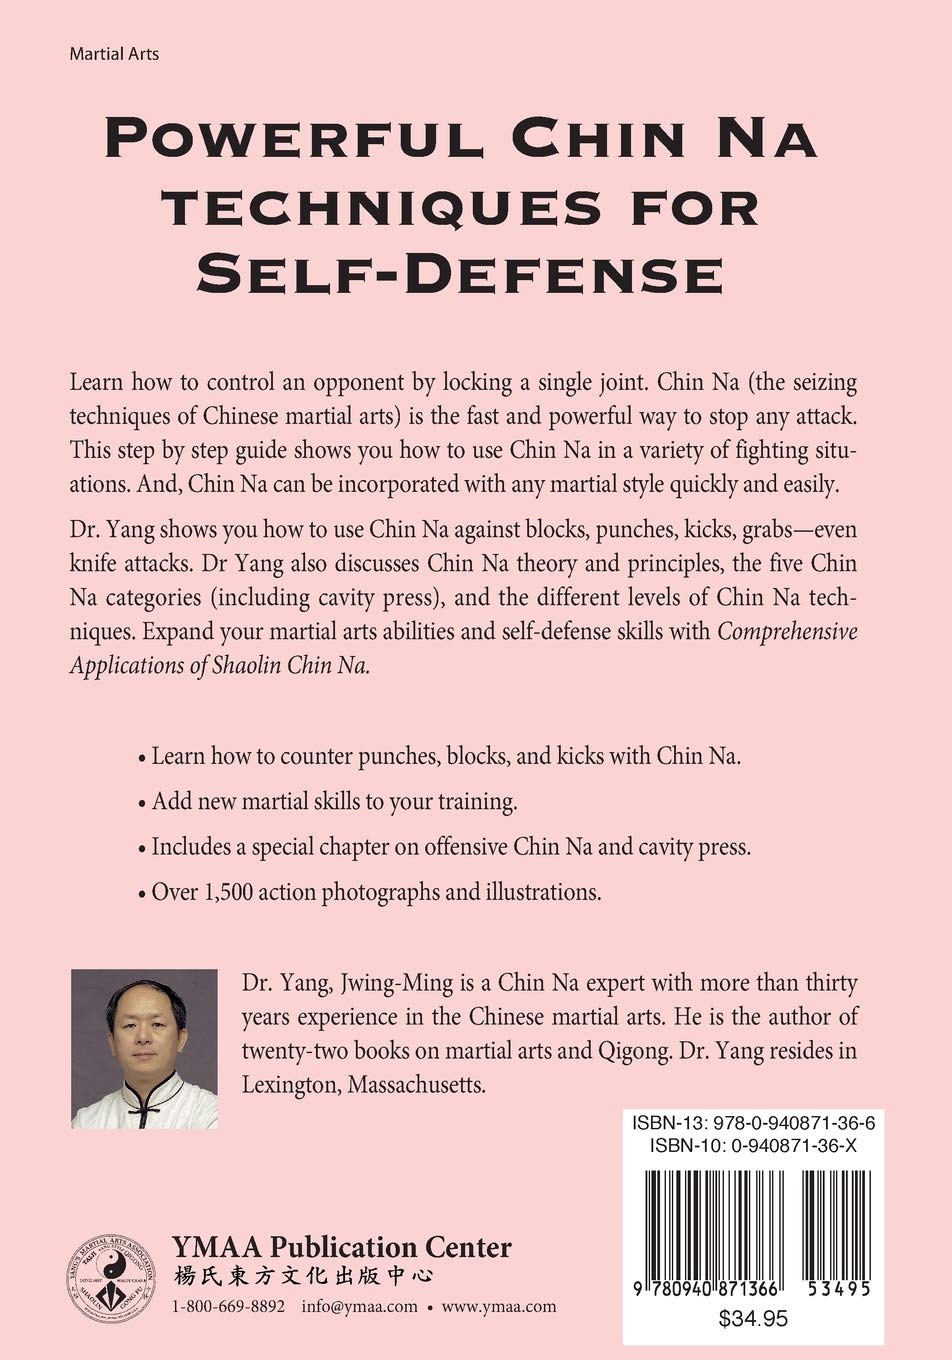 Comprehensive Applications of Shaolin Chin Na—Practical defense of Chinese Seizing Arts for All Martial Styles Book by Dr. Yang, Jwing-Ming - Budovideos Inc